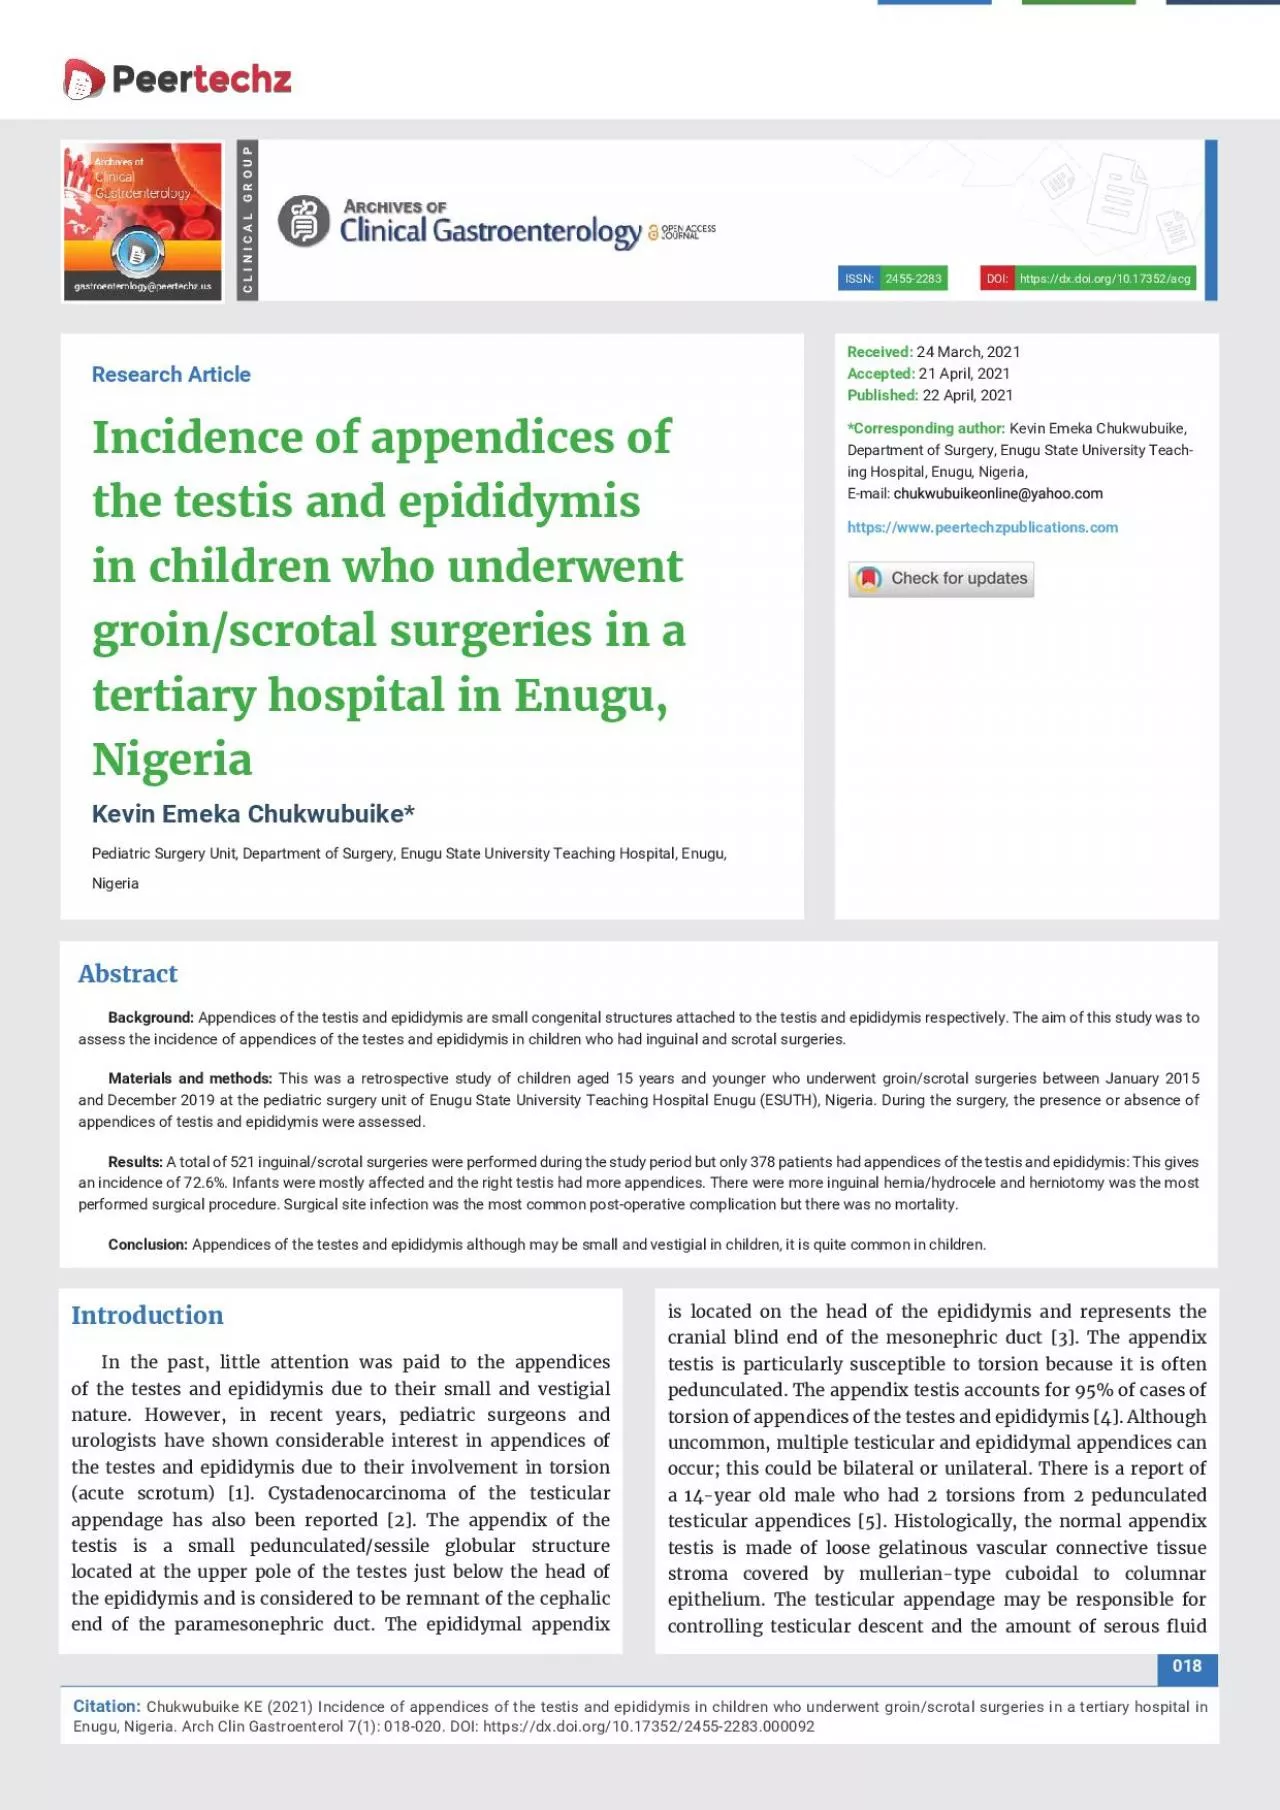 Appendices of the testis and epididymis are small congenital structure